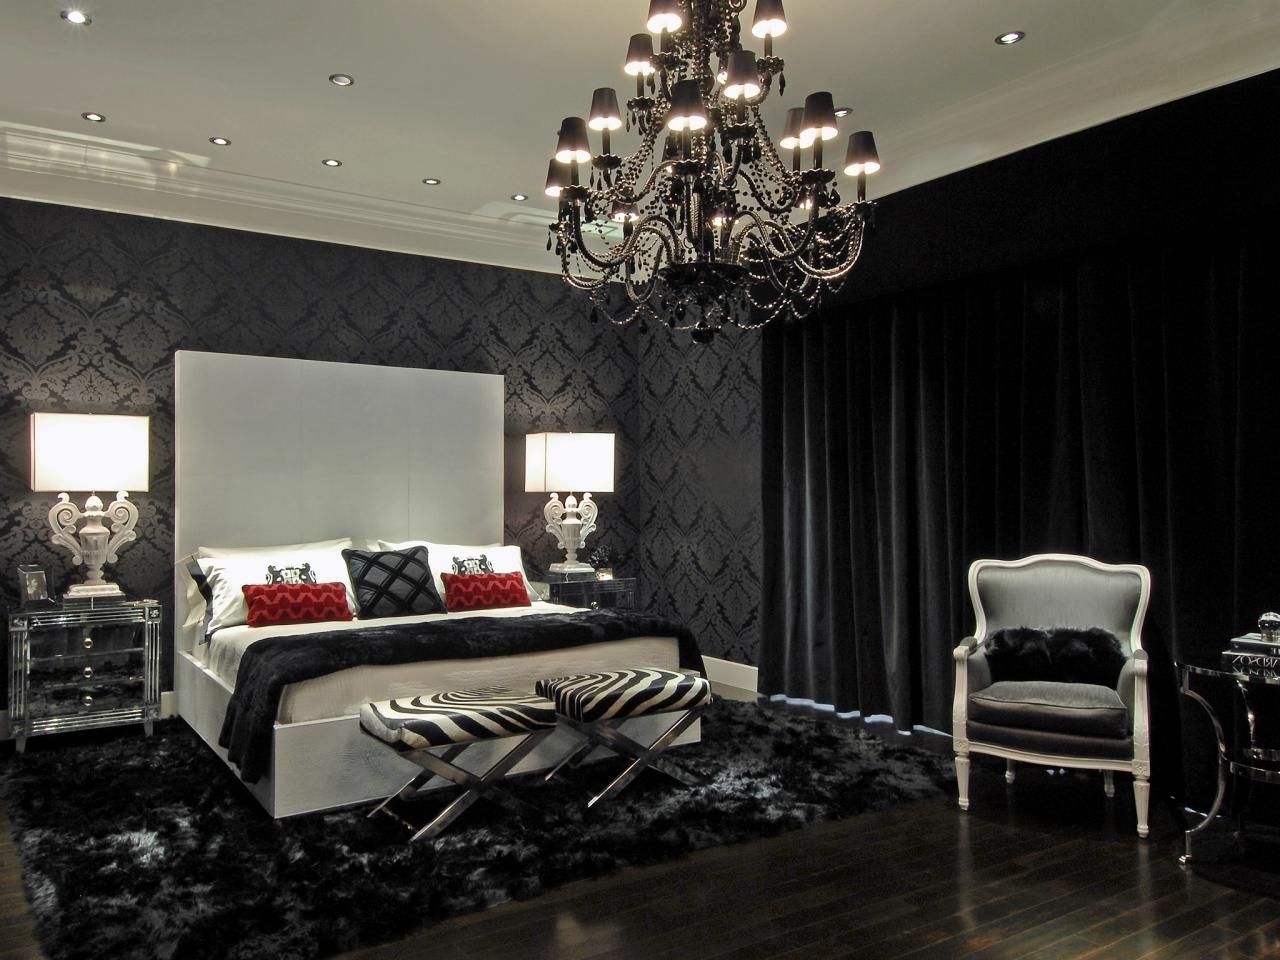 Black And White Damask Wall Art Within Most Recent Opulent Dark Damask Bedroom Decorating Idea With Big Black (View 11 of 15)